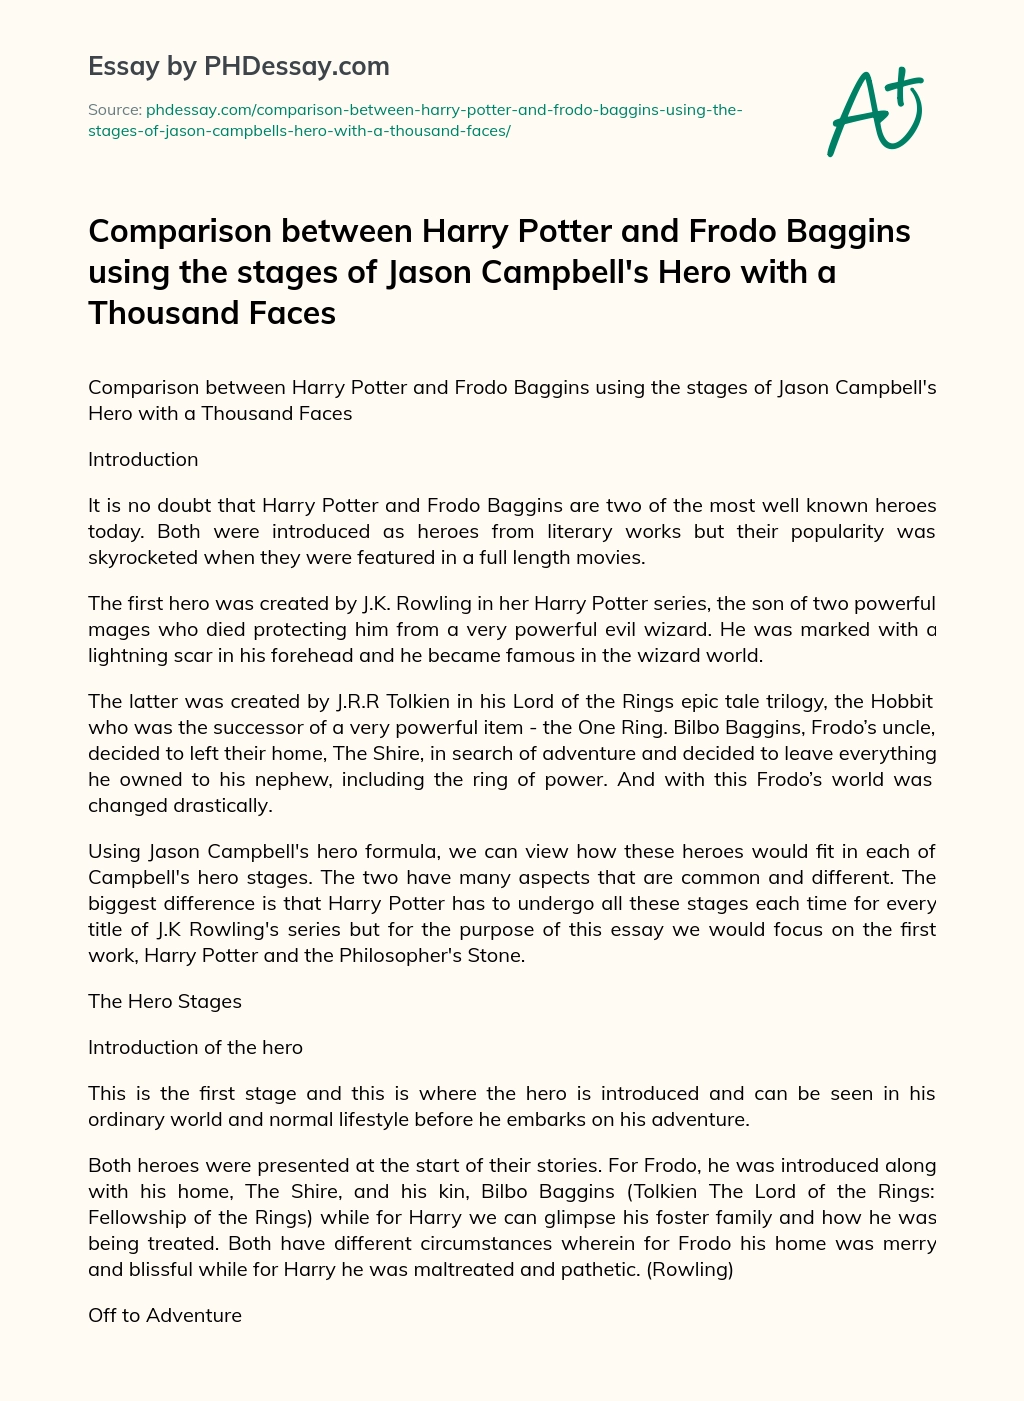 Comparison between Harry Potter and Frodo Baggins using the stages of Jason Campbell’s Hero with a Thousand Faces essay